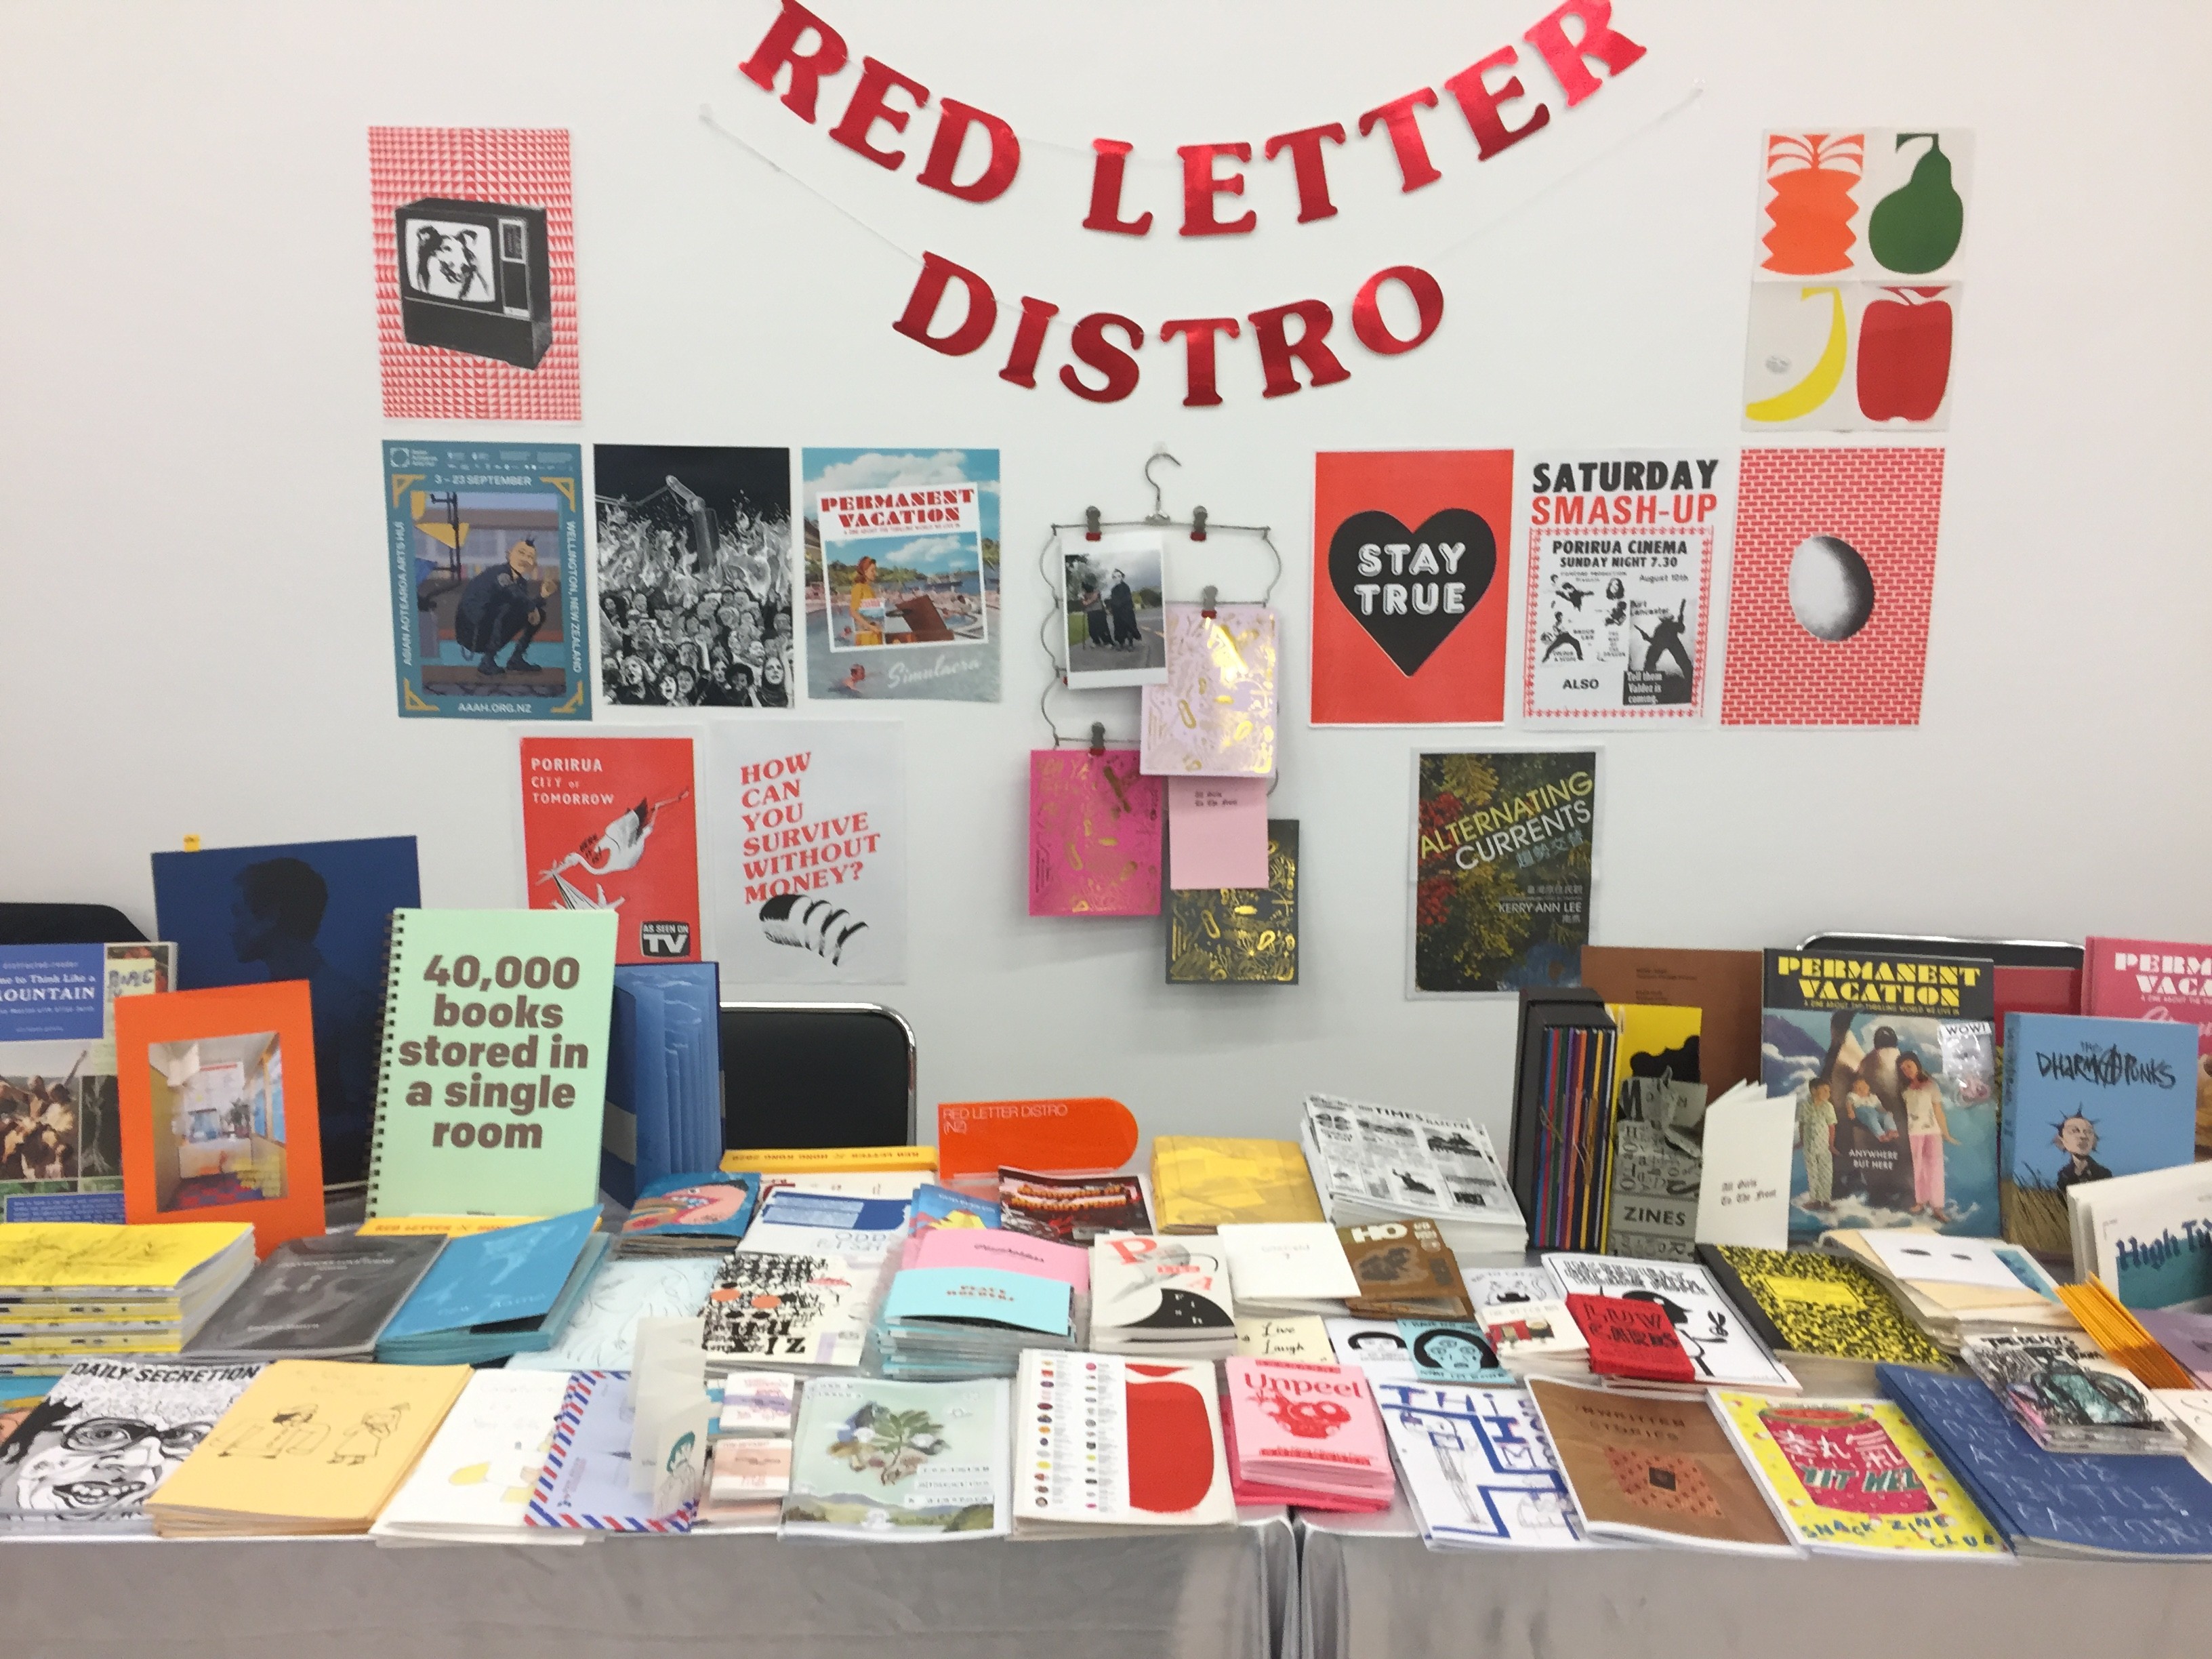 A zine table with multiple colourful zines on display and a banner above with the words "Red Letter Distro" on red glossy paper. 